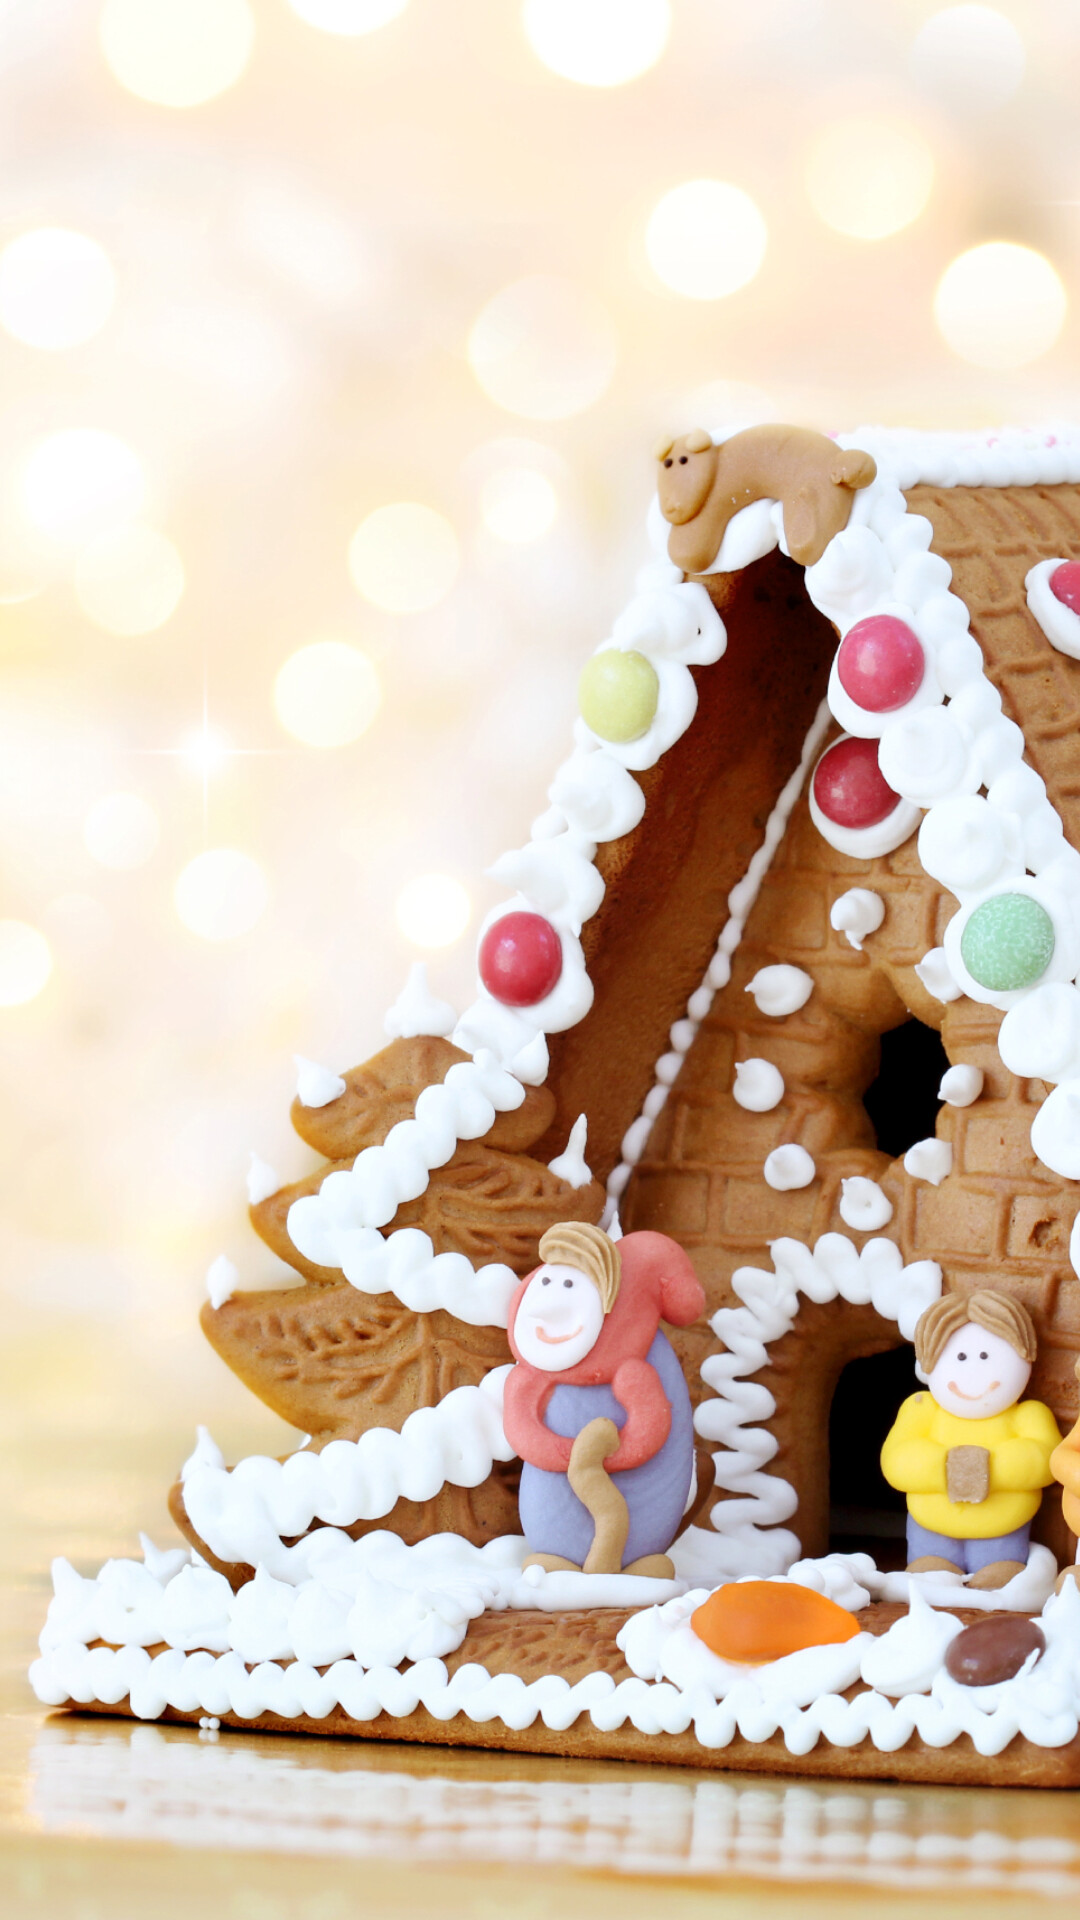 Gingerbread House: Figure-shaped gingerbread, Baked goods, Typically flavored with ginger, Creations elaborately detailed. 1080x1920 Full HD Wallpaper.